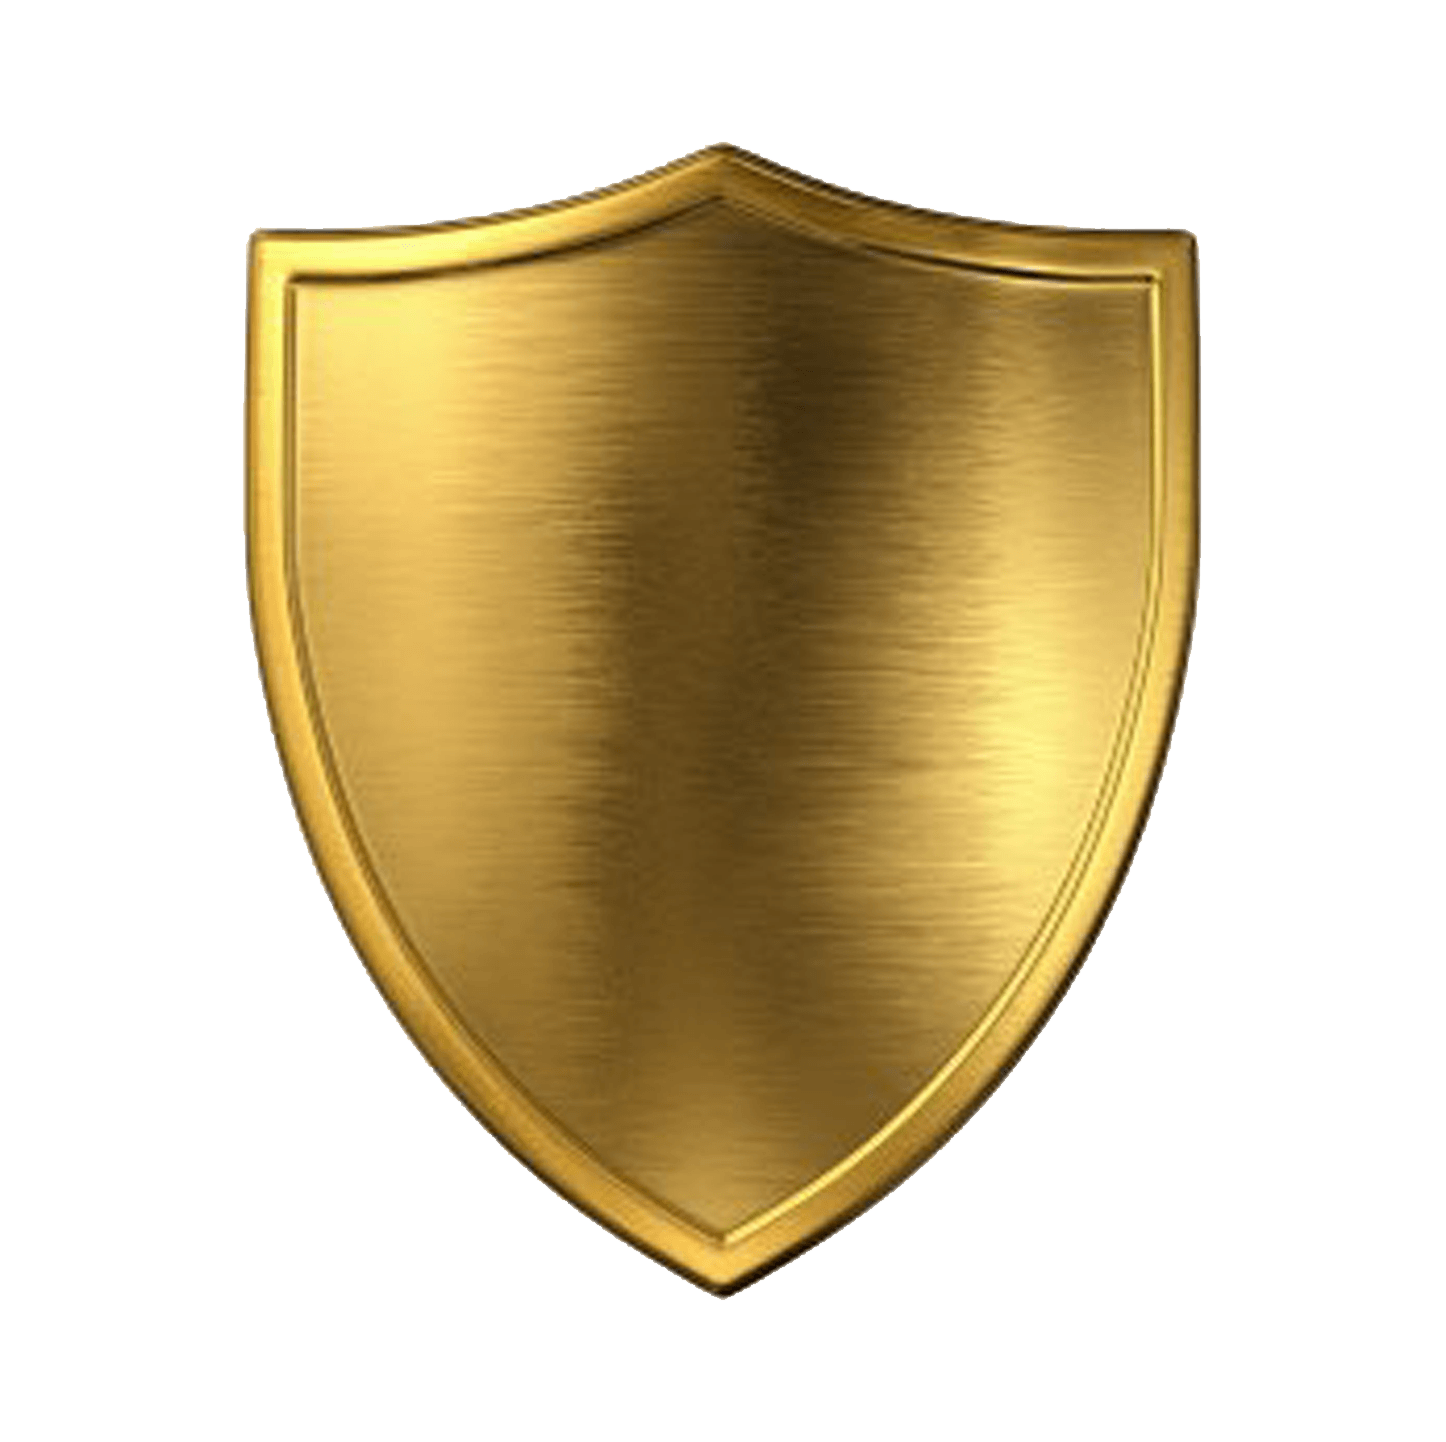 Black and Gold Shield Logo - Gold Shield PNG Image - PurePNG | Free transparent CC0 PNG Image Library